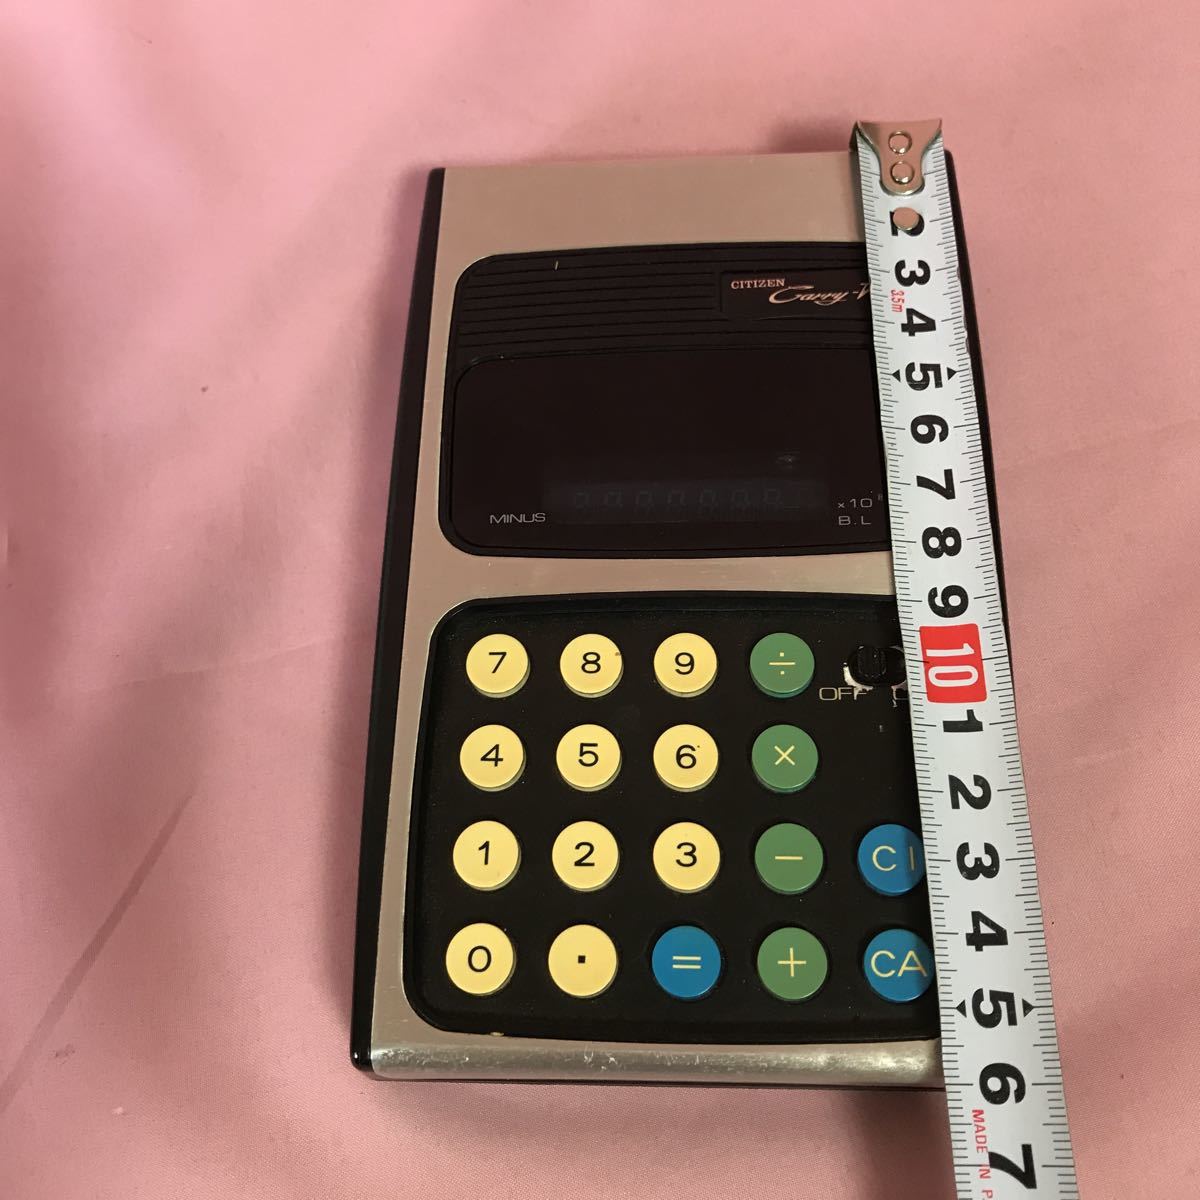 Z-060 CITIZEN Carry-Ⅴ BUSINESS MACHINES Citizen calculator battery because of electrification / operation verification ending UM-3×4 AC adaptor less case ( storage is not possible )